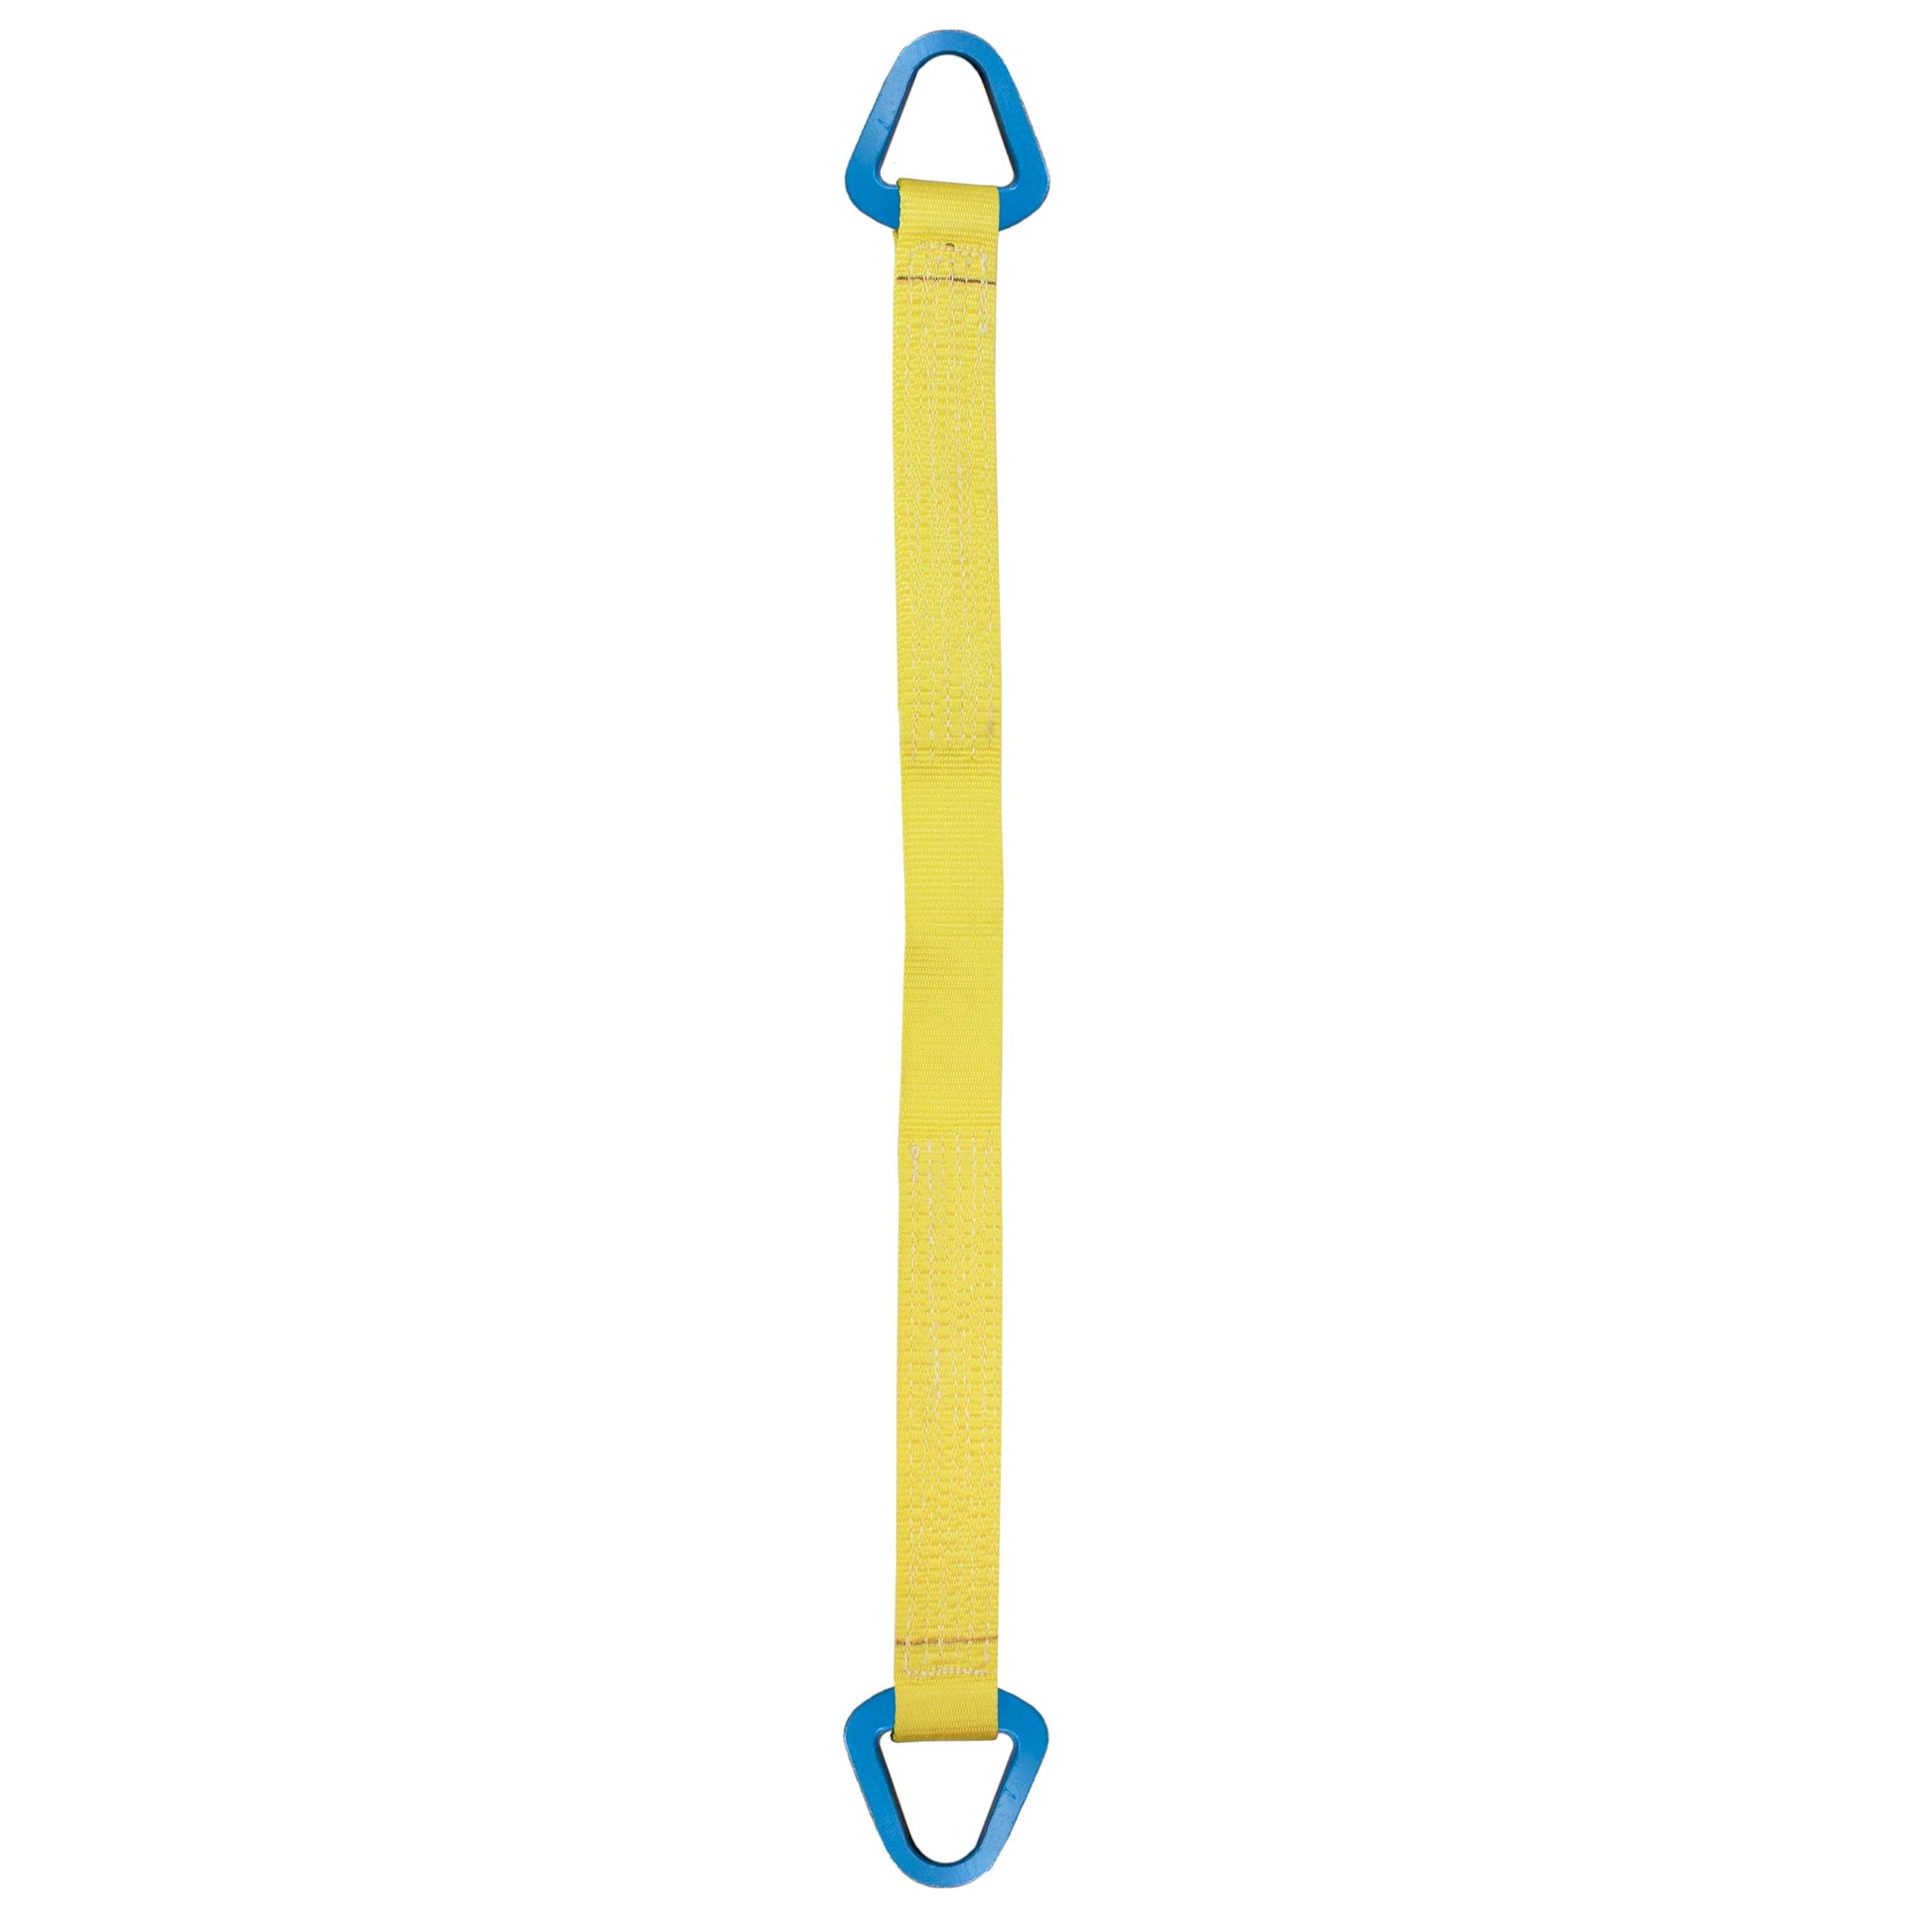 Nylon Lifting Sling Triangle 4 inch x 12 foot 1ply image 1 of 2